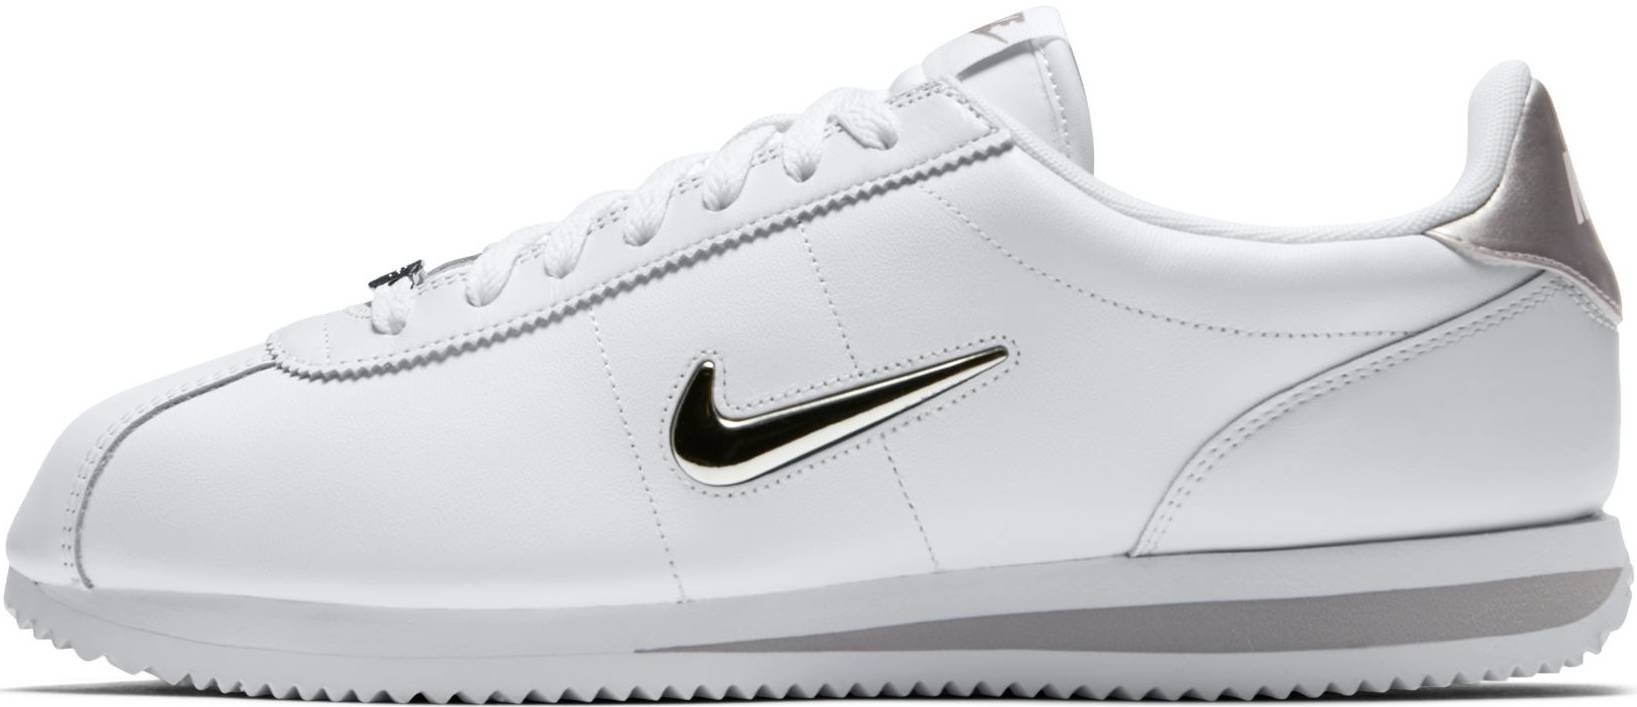 white nike shoes with silver tick